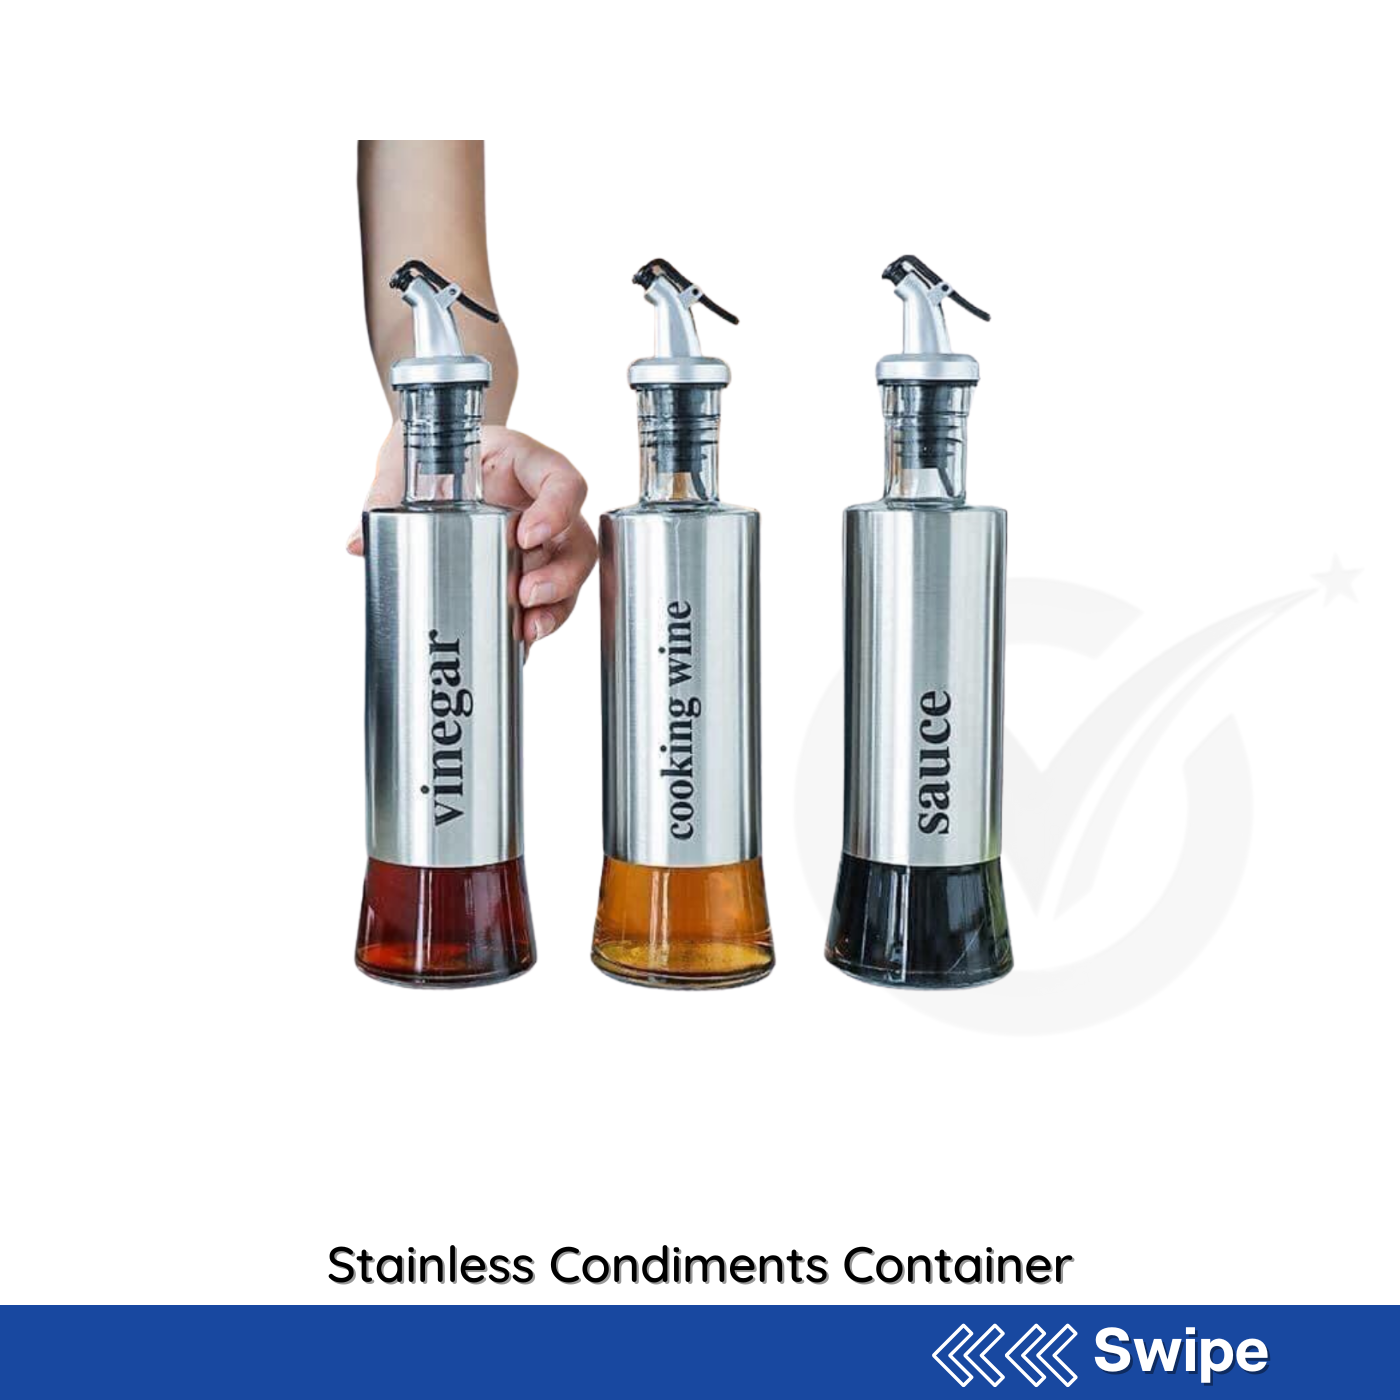 Stainless Condiments Container - People's Choice Marketing